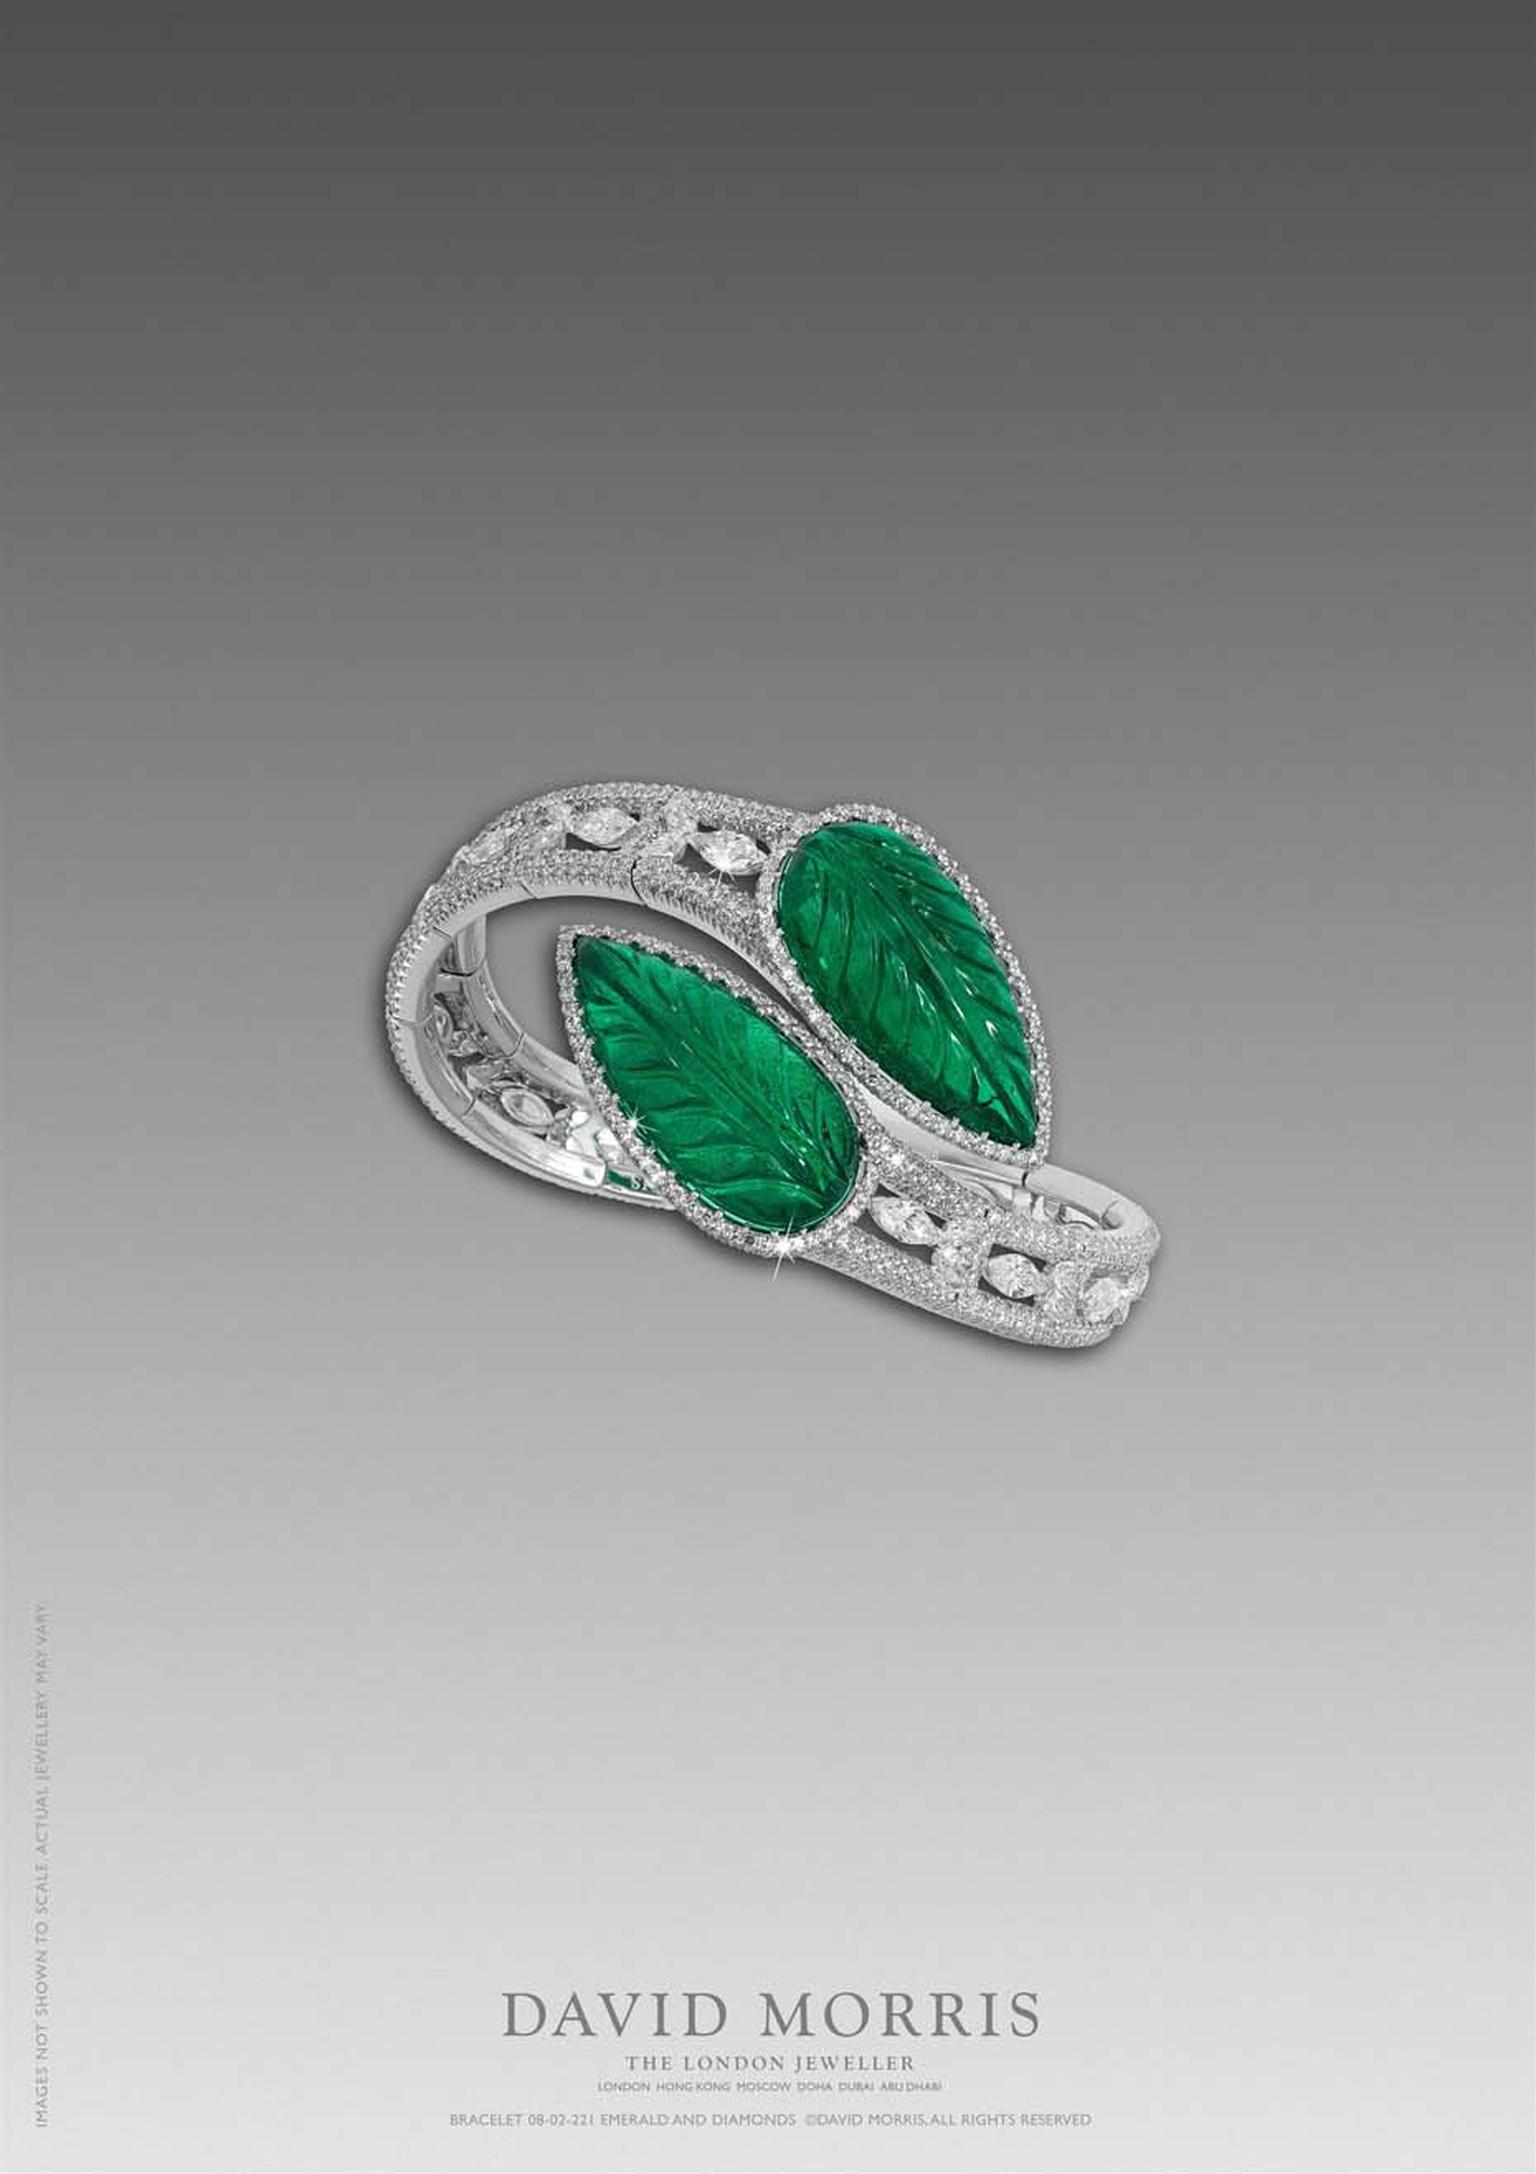 David Morris' use of coloured gemstones is showcased beautifully in this carved Zambian emerald flexible bangle, with marquise and pear shape motifs and white diamond micro-set diamonds.